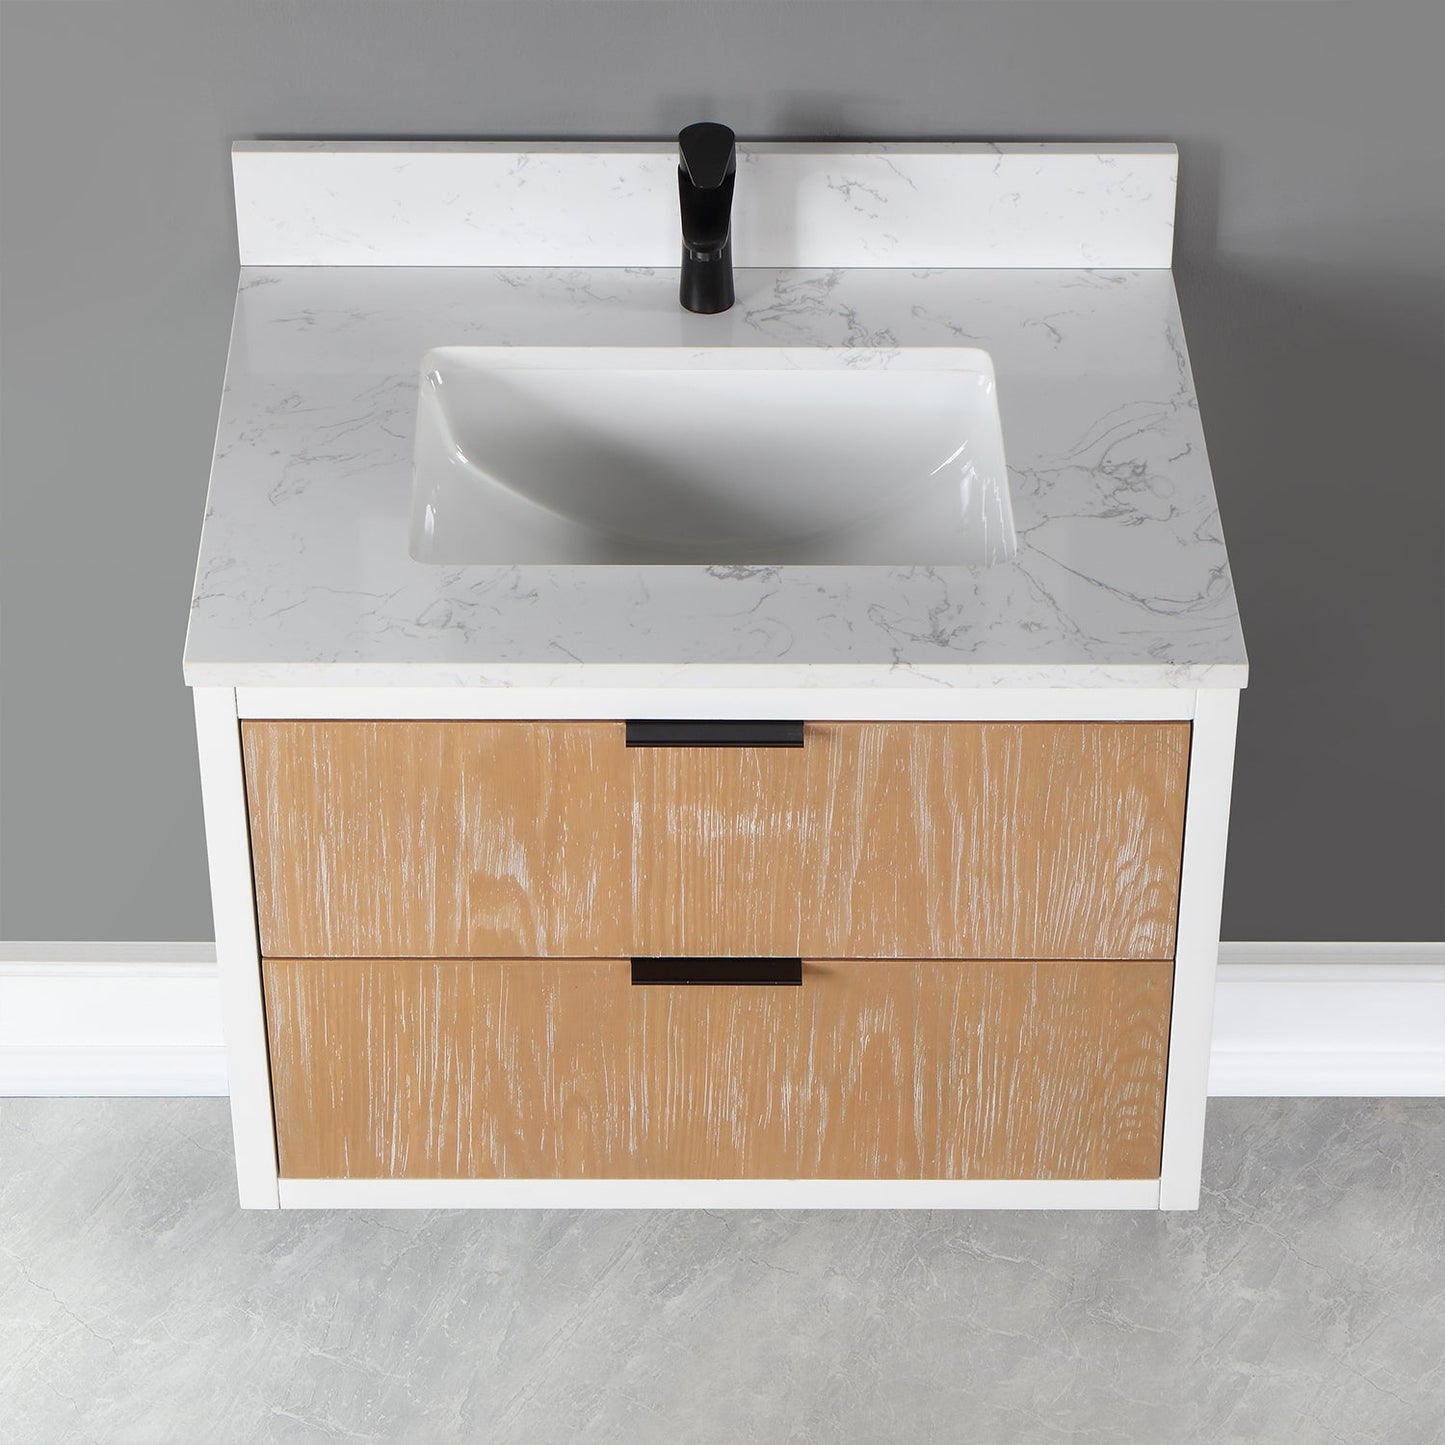 Dione 30" Single Bathroom Vanity in Weathered Pine with Carrara White Composite Stone Countertop without Mirror